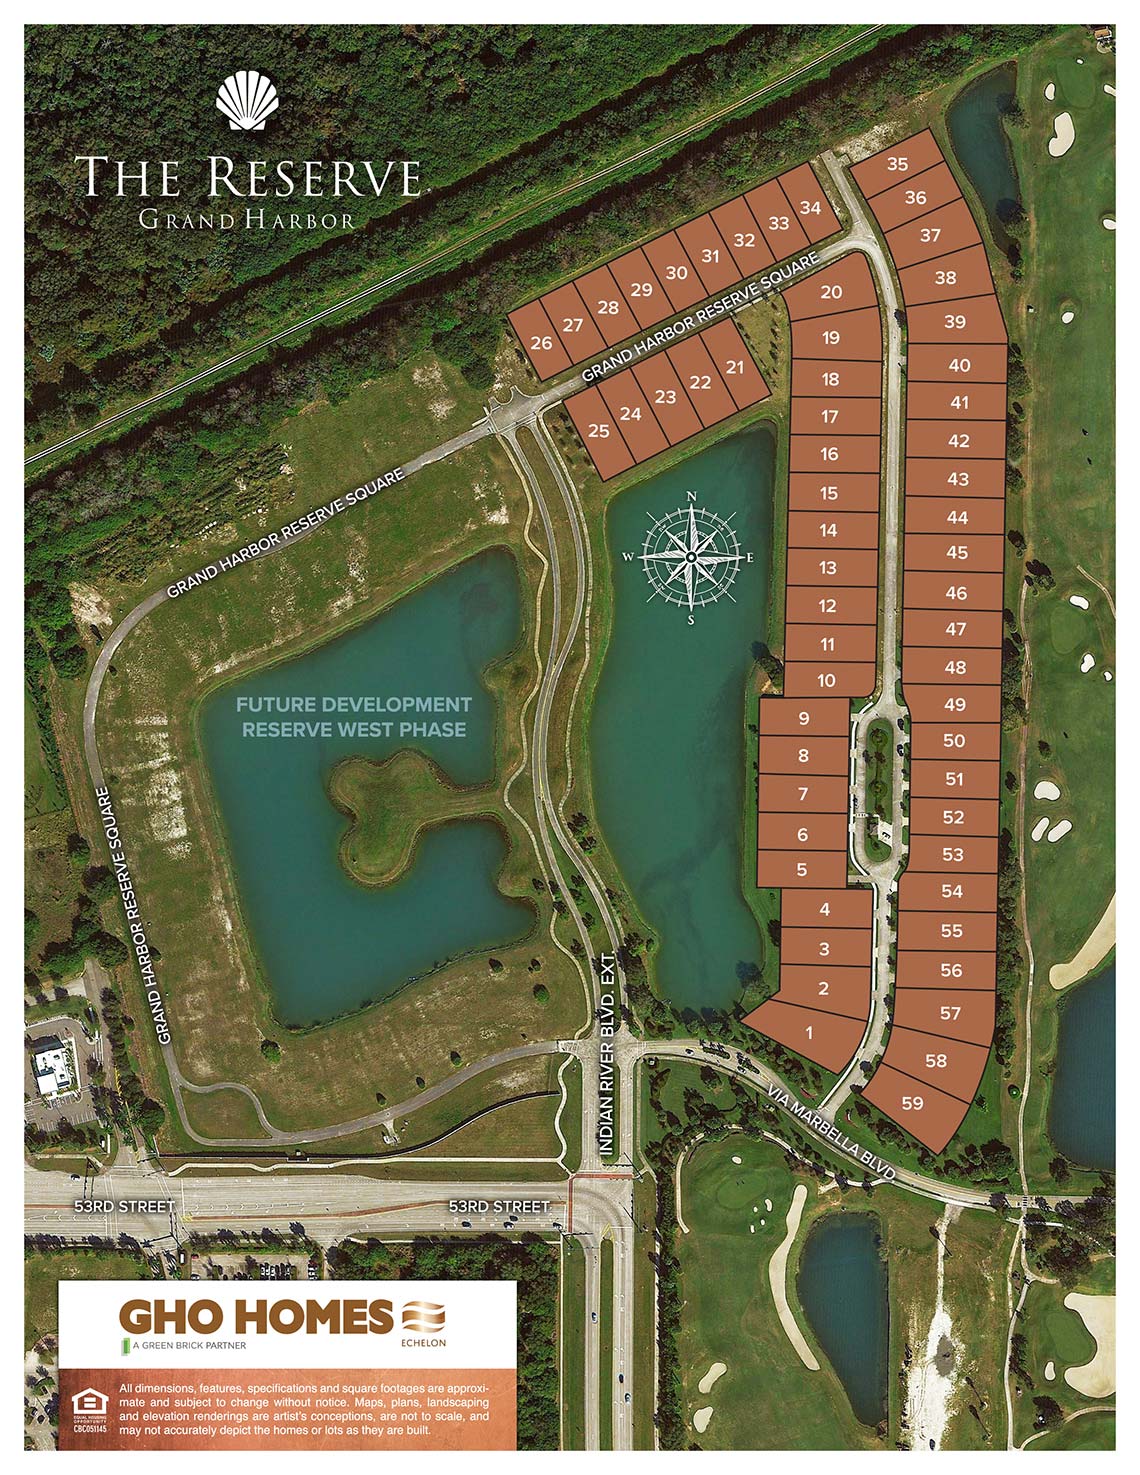 The Reserve Site Plan